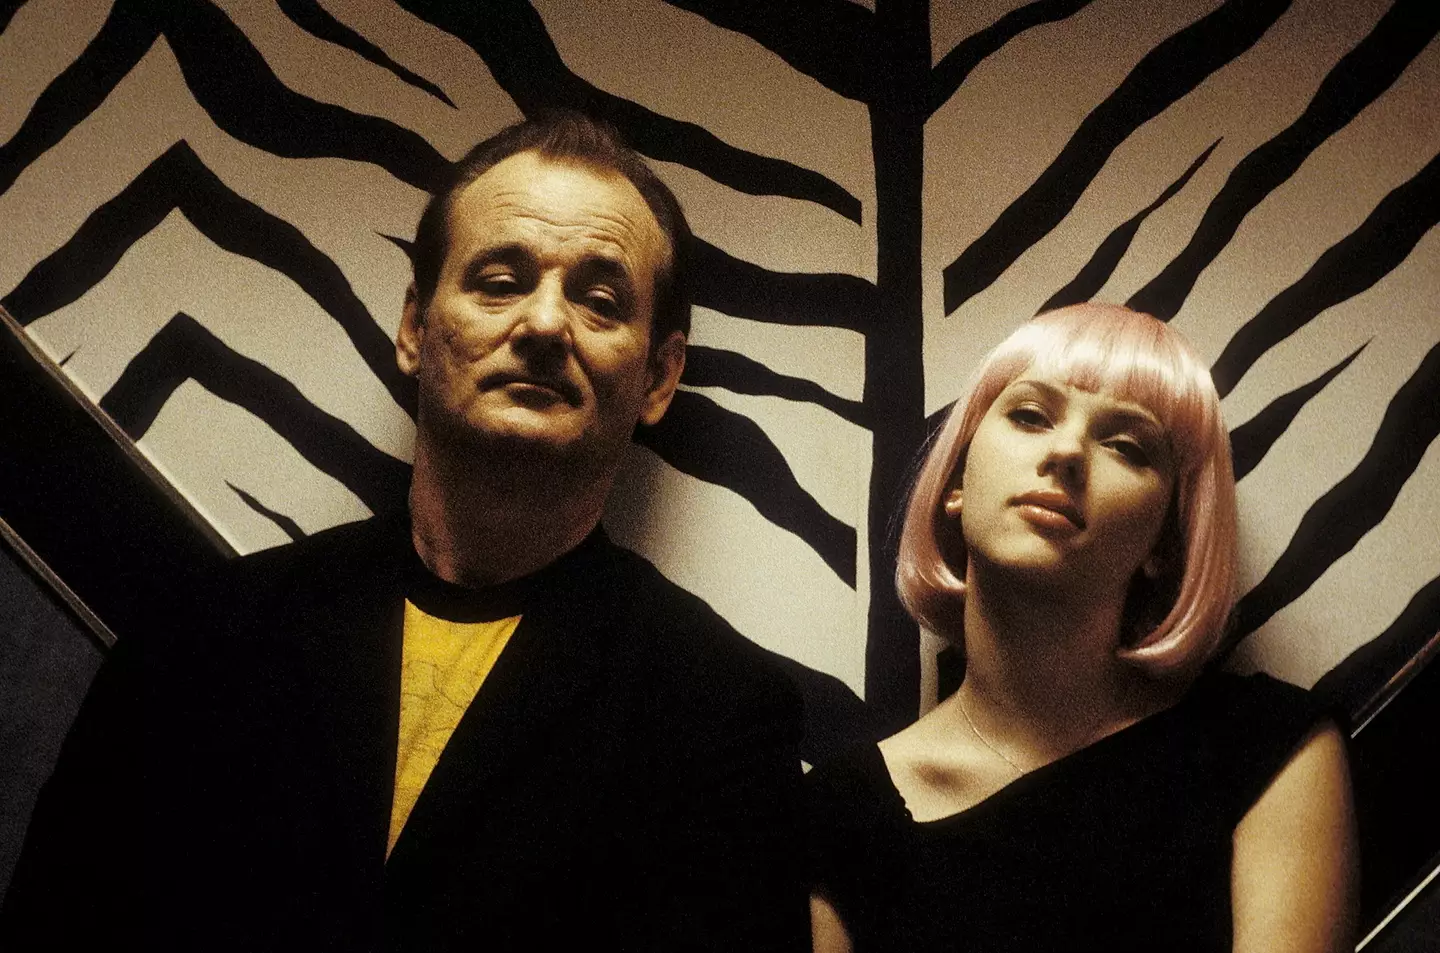 At 17, Johansson played a role five years older in Lost In Translation.